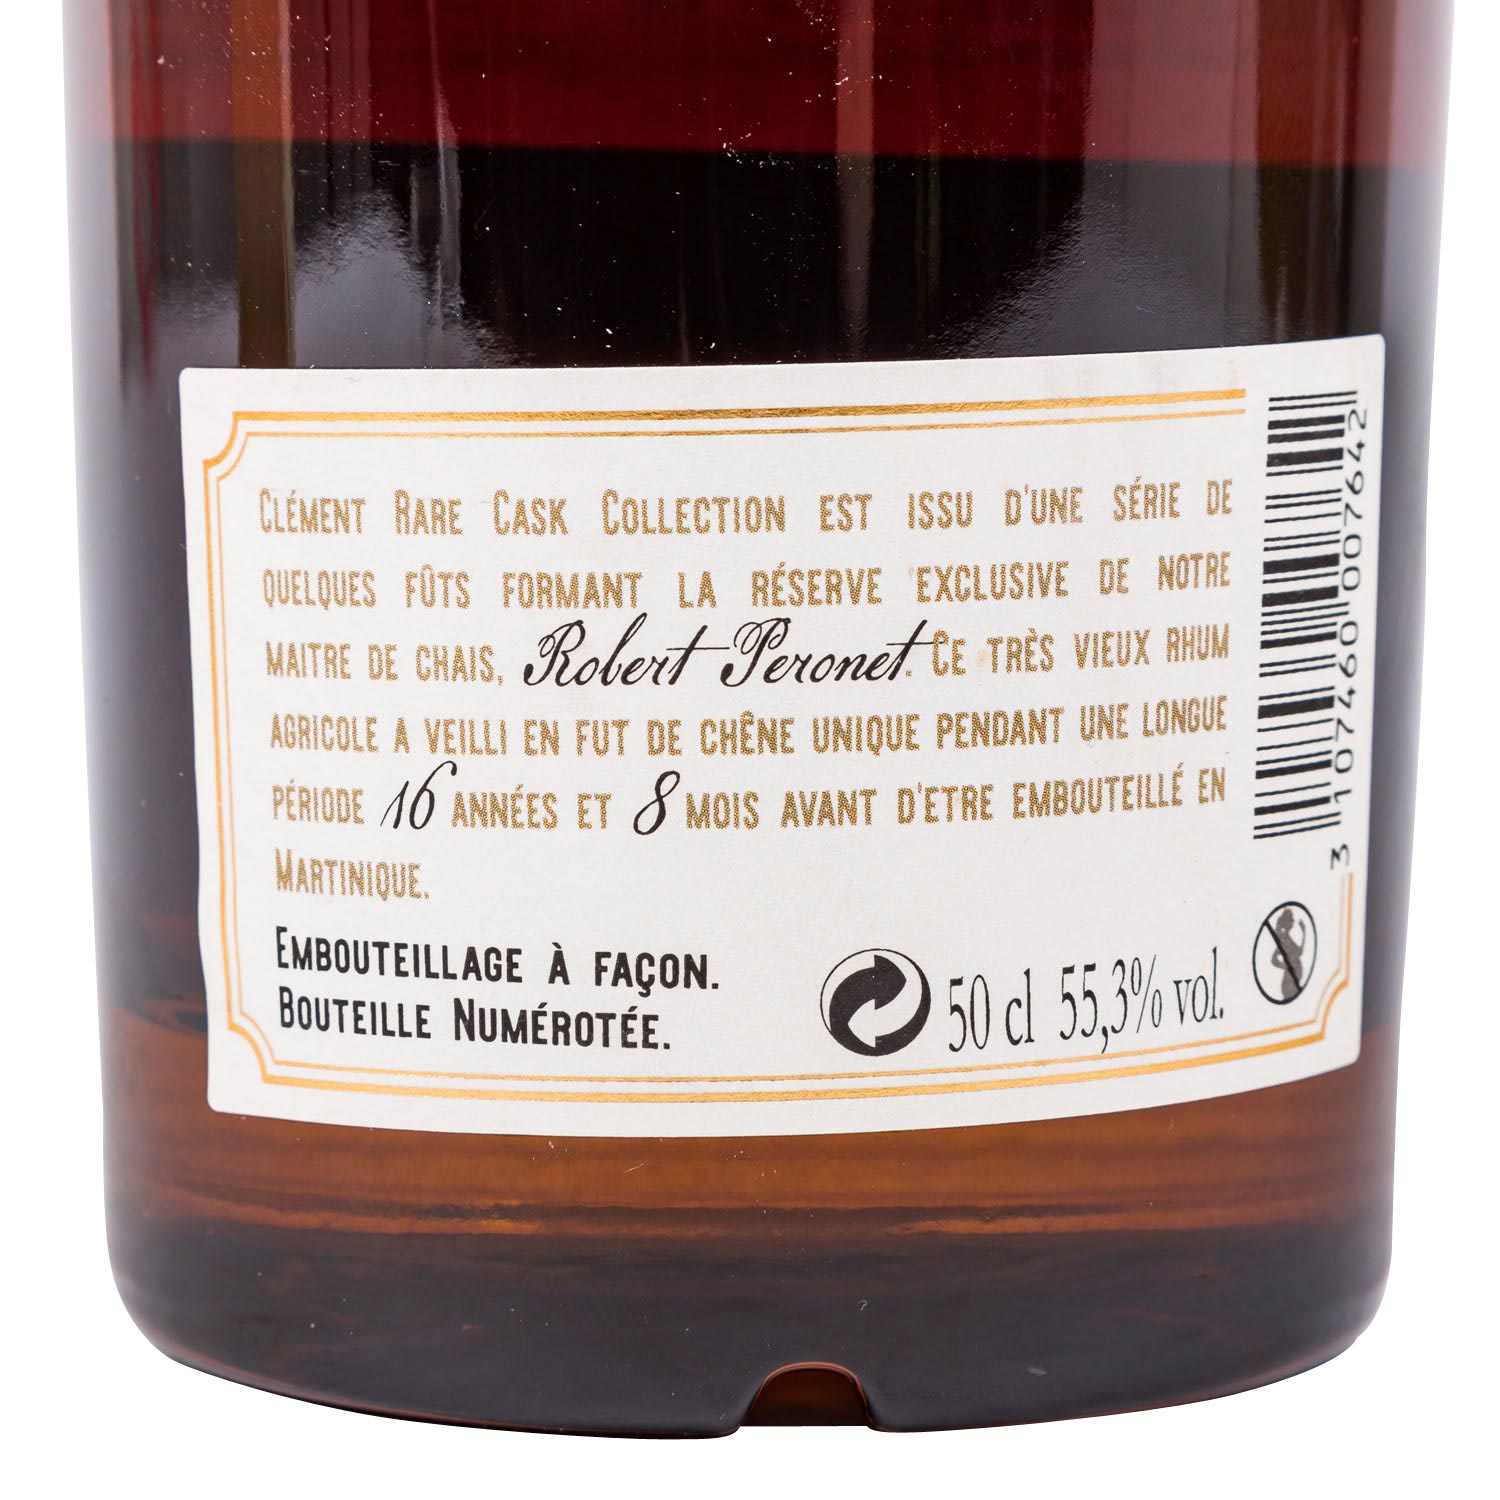 CLÉMENT "25 Years Old" Rare Cask Collection Rum - Image 6 of 7